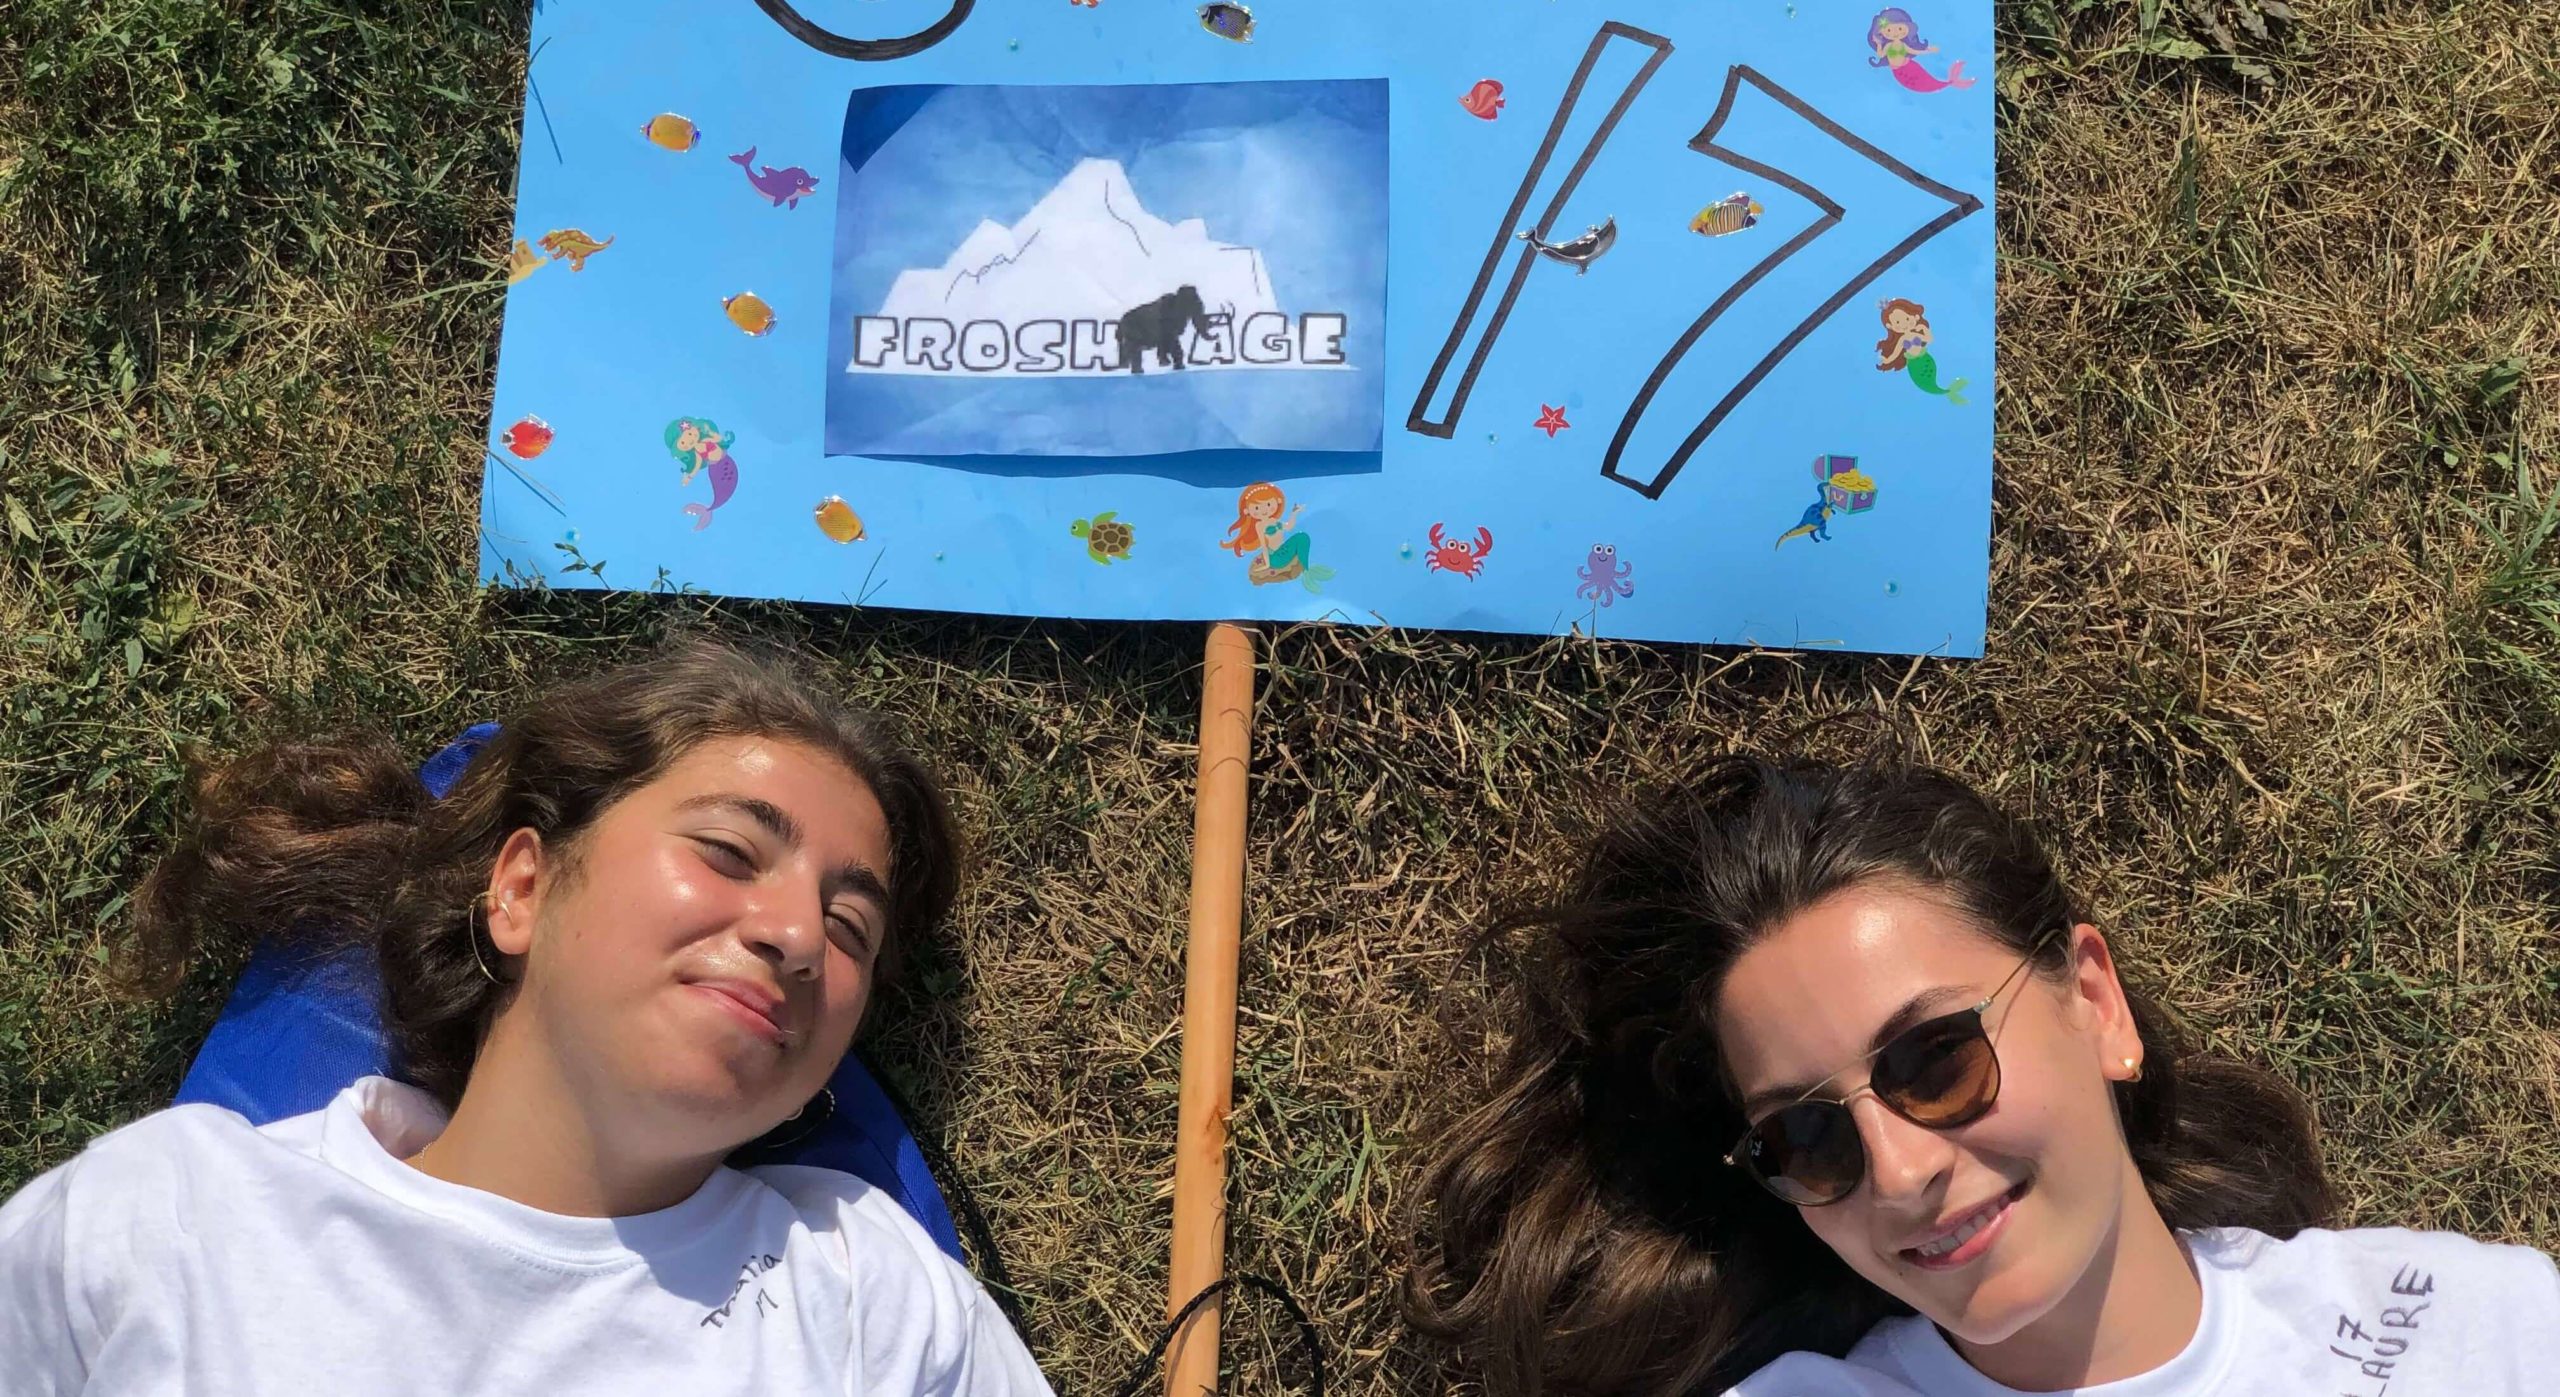 Students laying in grass with Frosh sign